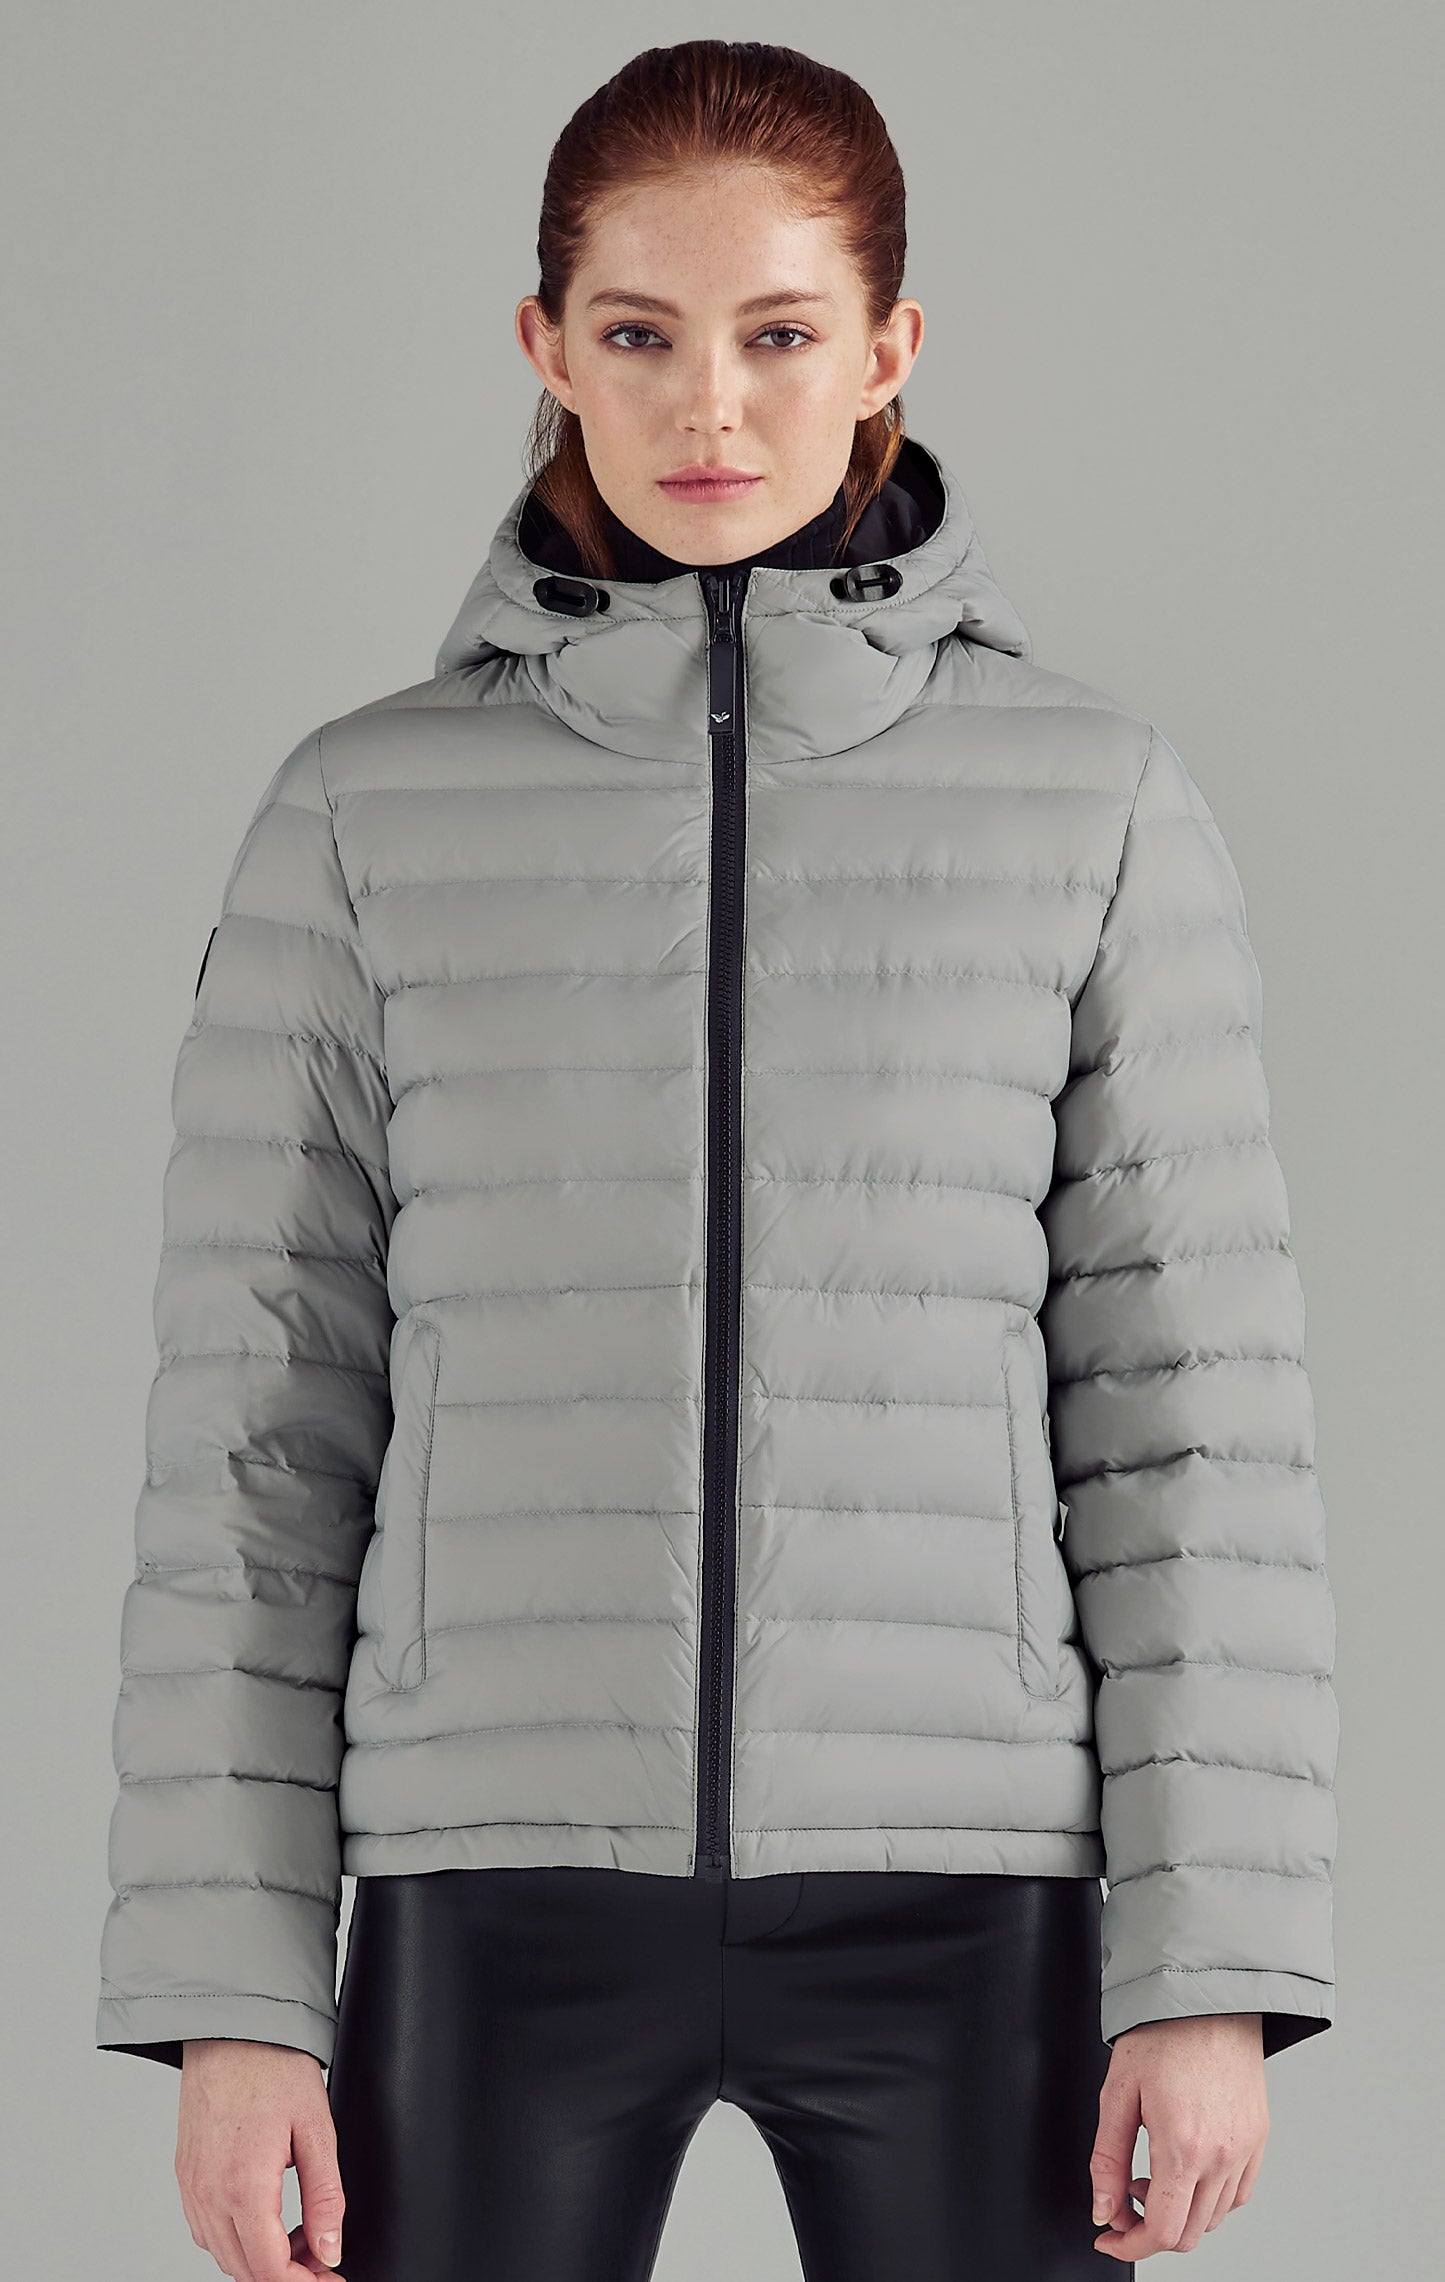 Nor'Easter Down-Filled Puffer Vest